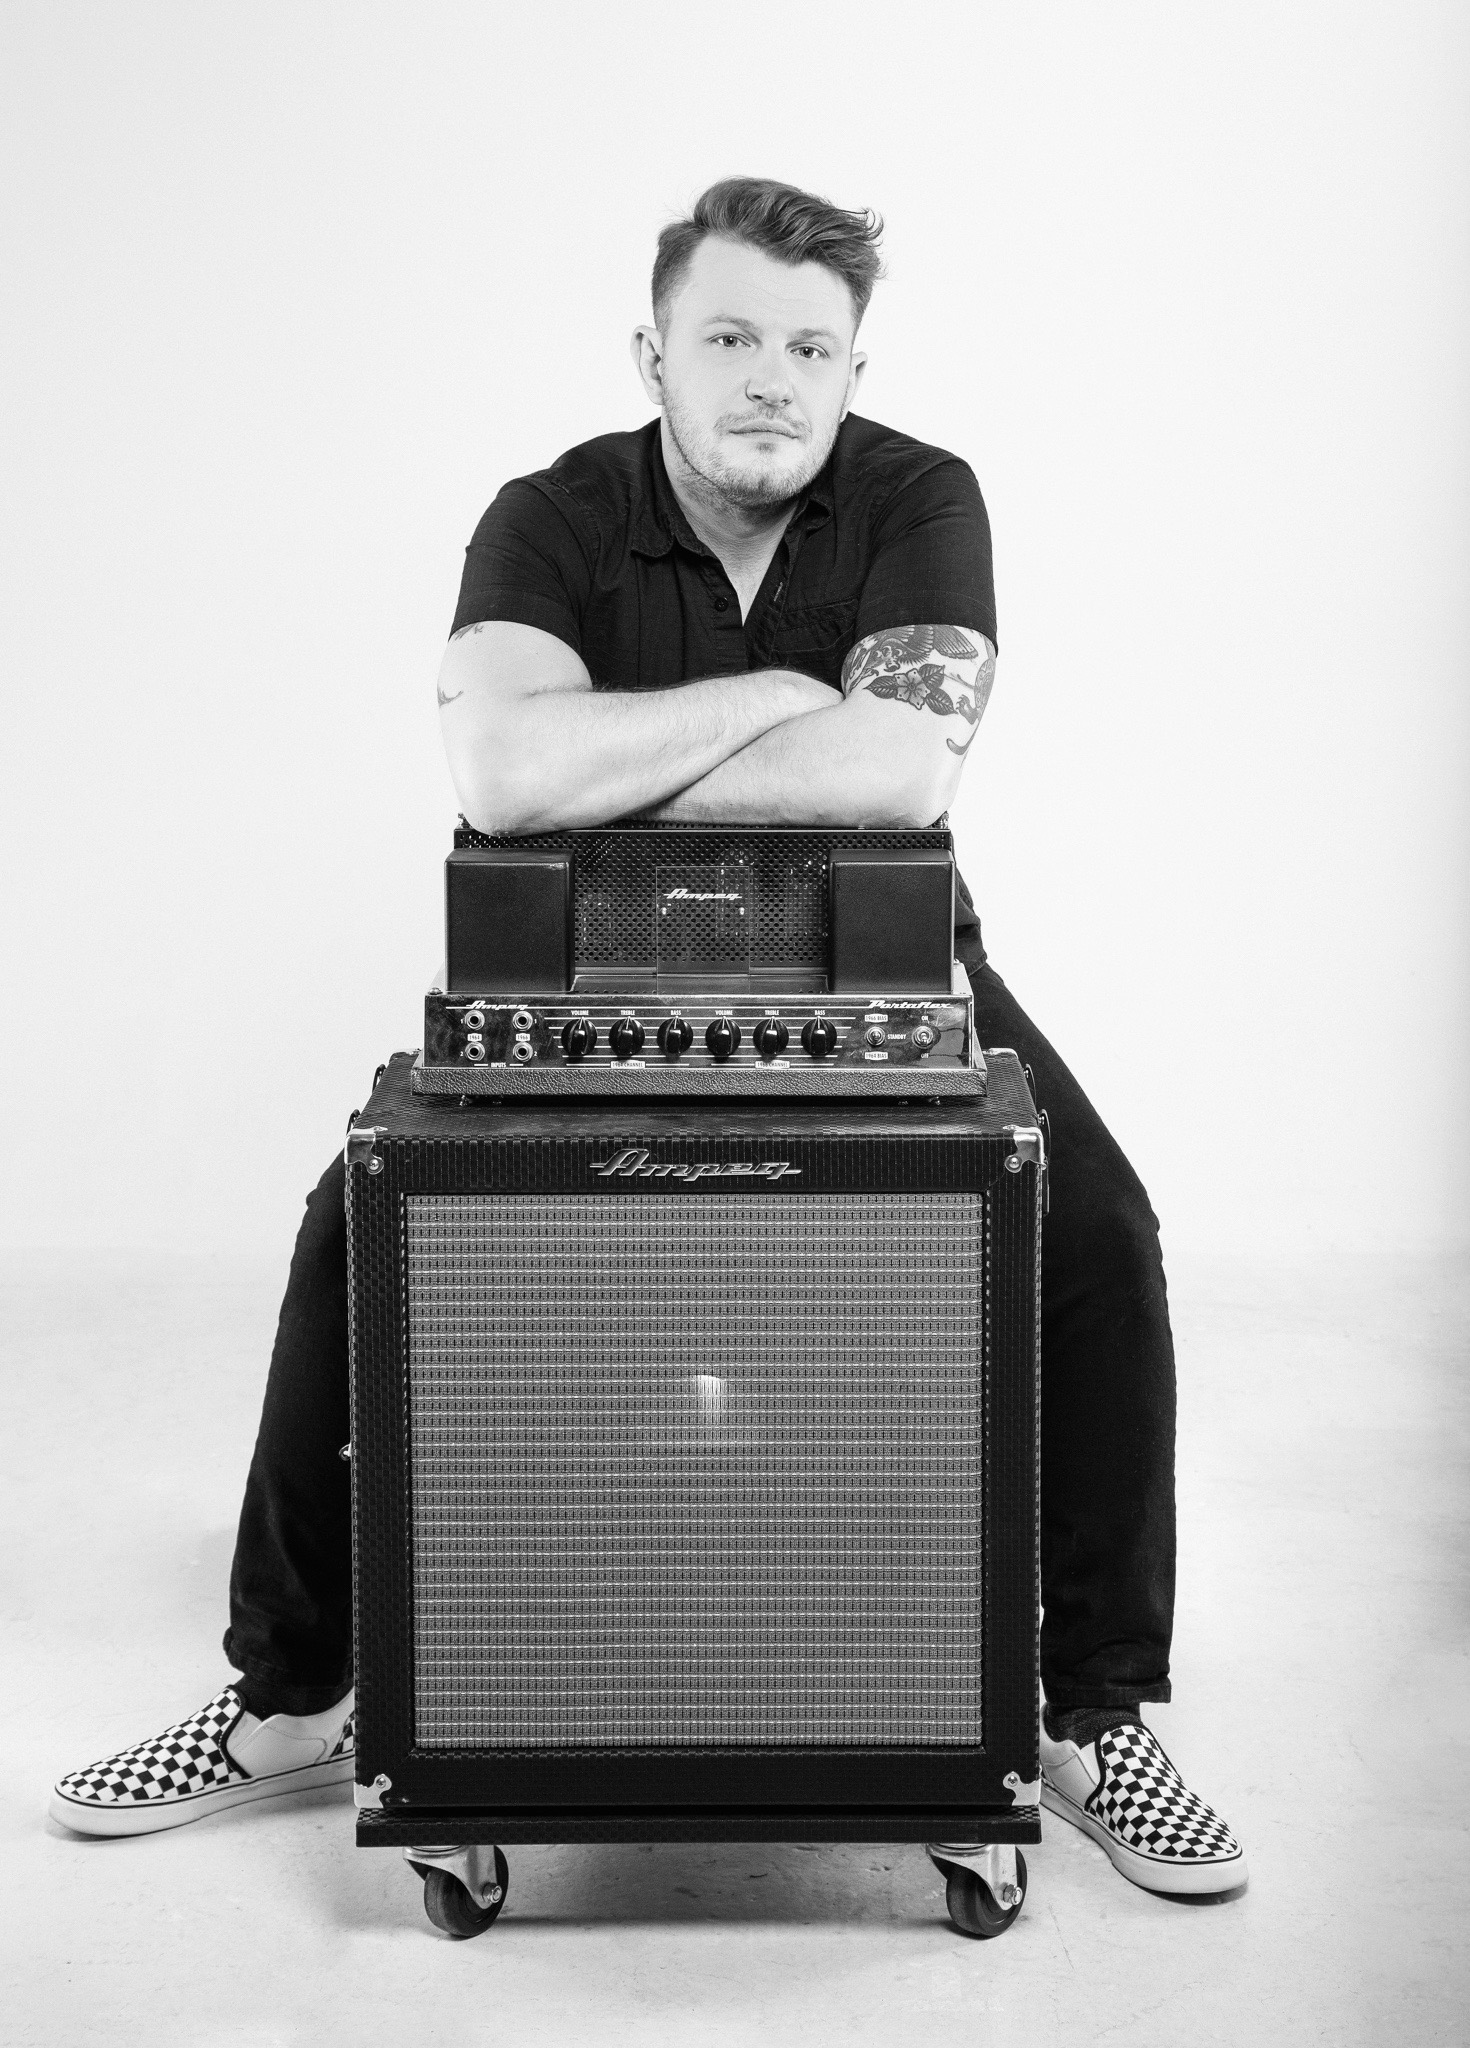 Shawn Scruggs sitting behind and leaning on an Ampeg head and cab